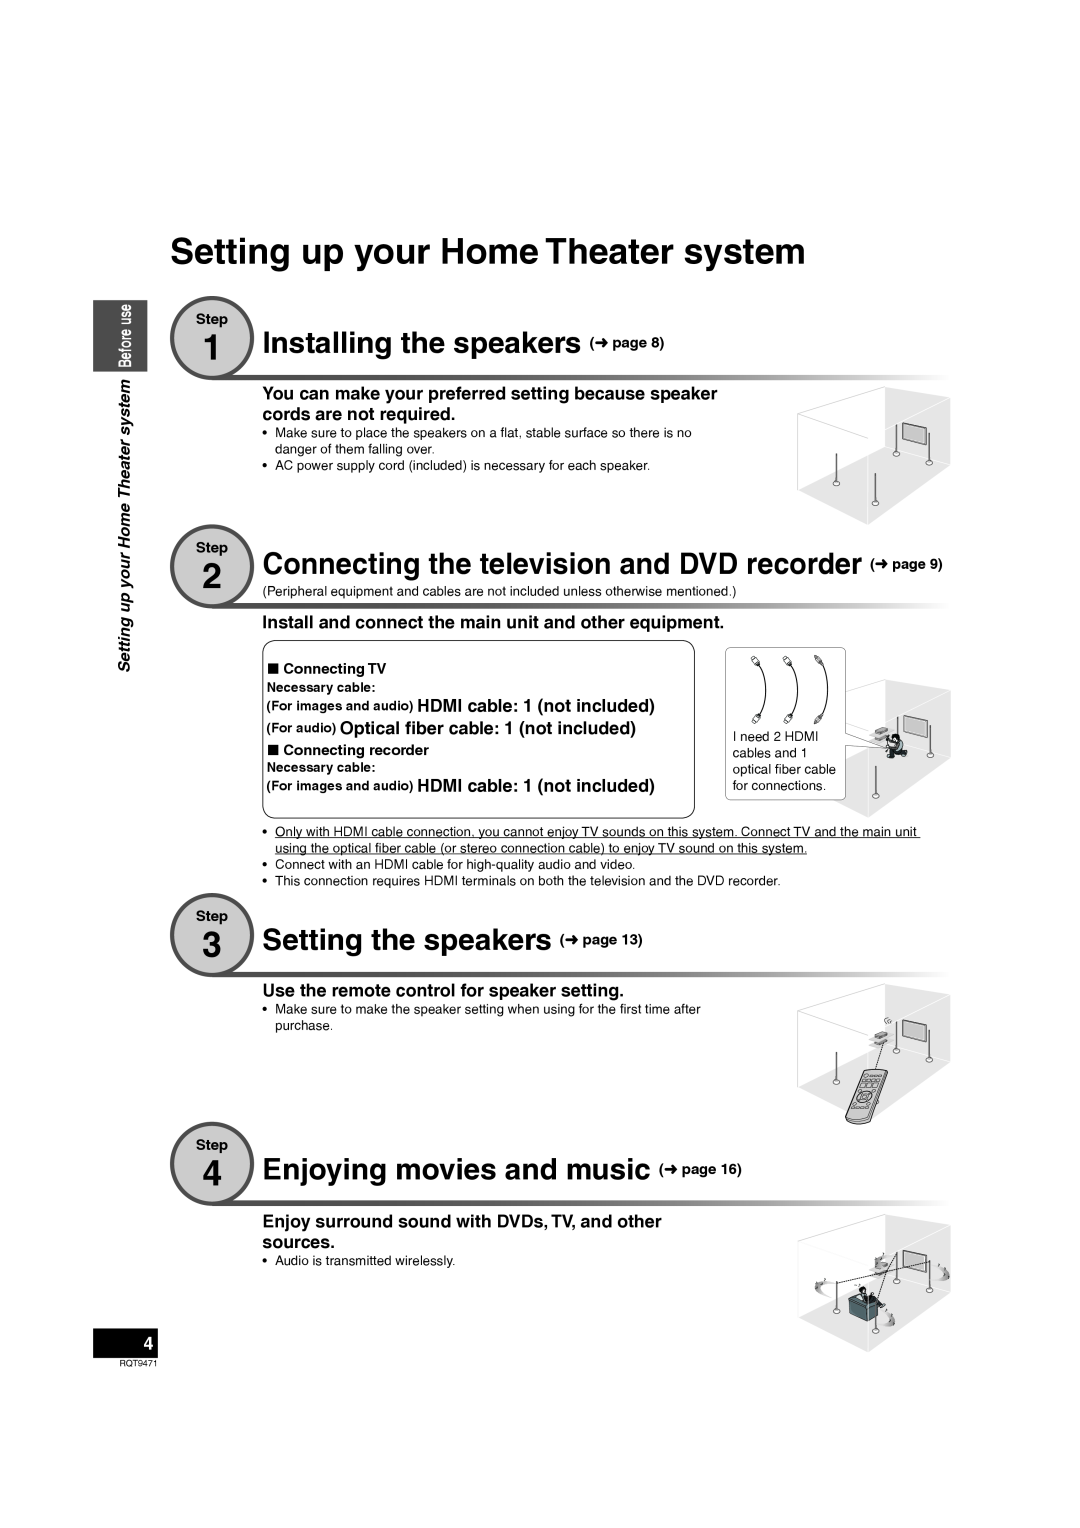 Panasonic SC-ZT1 warranty Setting up your Home Theater system, 1Installing the speakers page, 3Setting the speakers page 